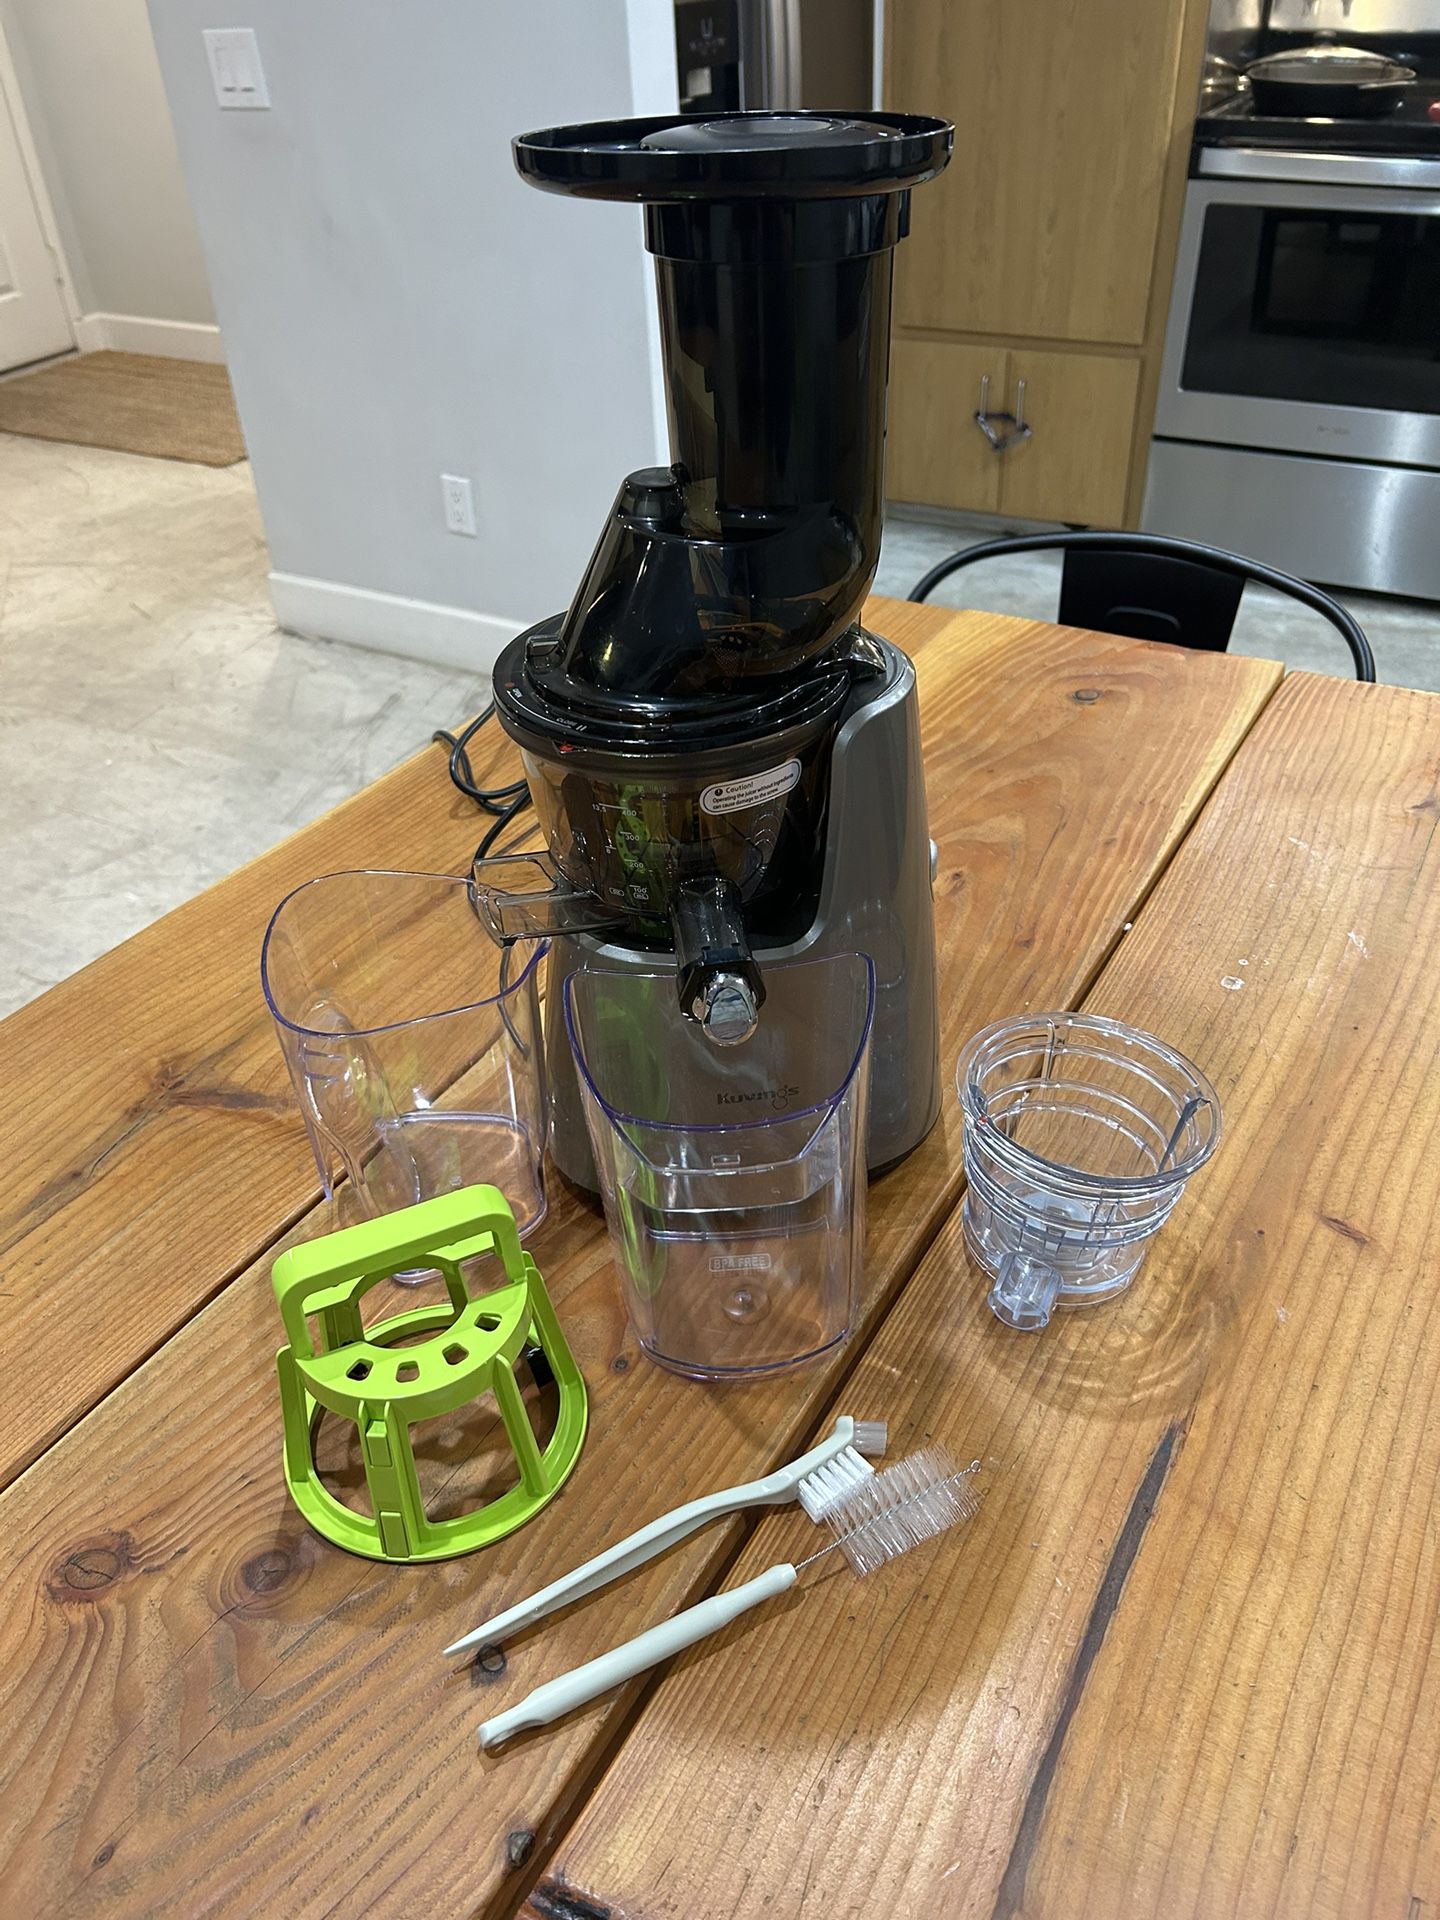 Kuvings Whole Slow Juicer Revo830 for Sale in Greenville, NC - OfferUp